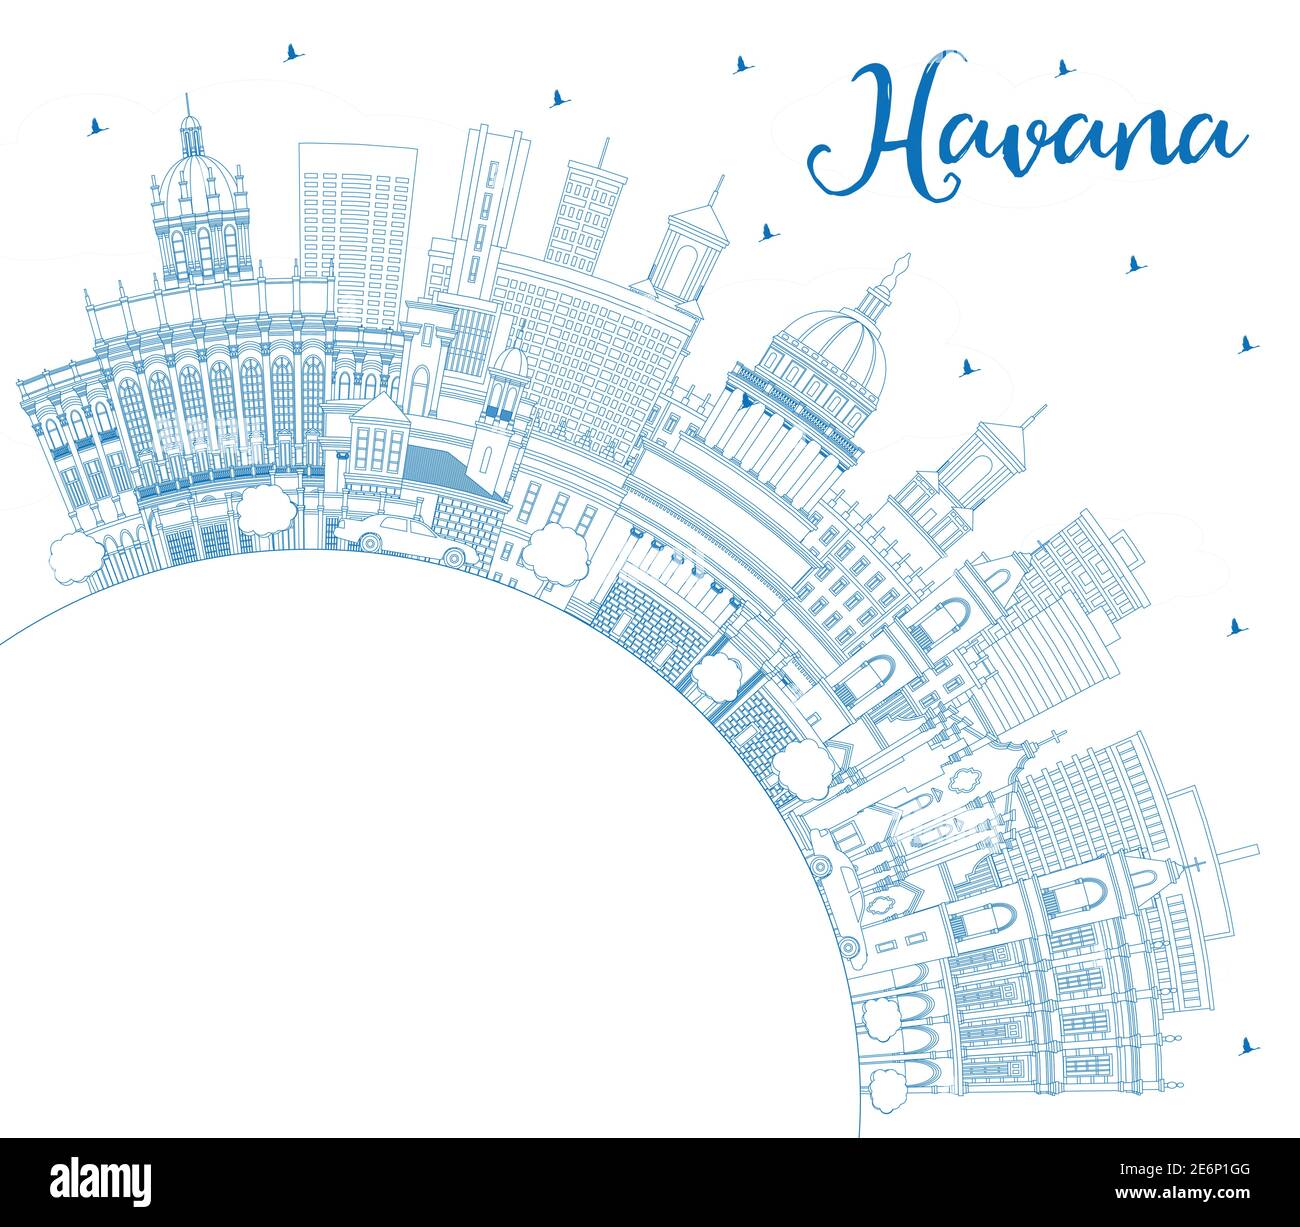 Outline Havana Cuba City Skyline with Blue Buildings and Copy Space. Vector Illustration. Tourism Concept with Historic and Modern Architecture. Stock Vector